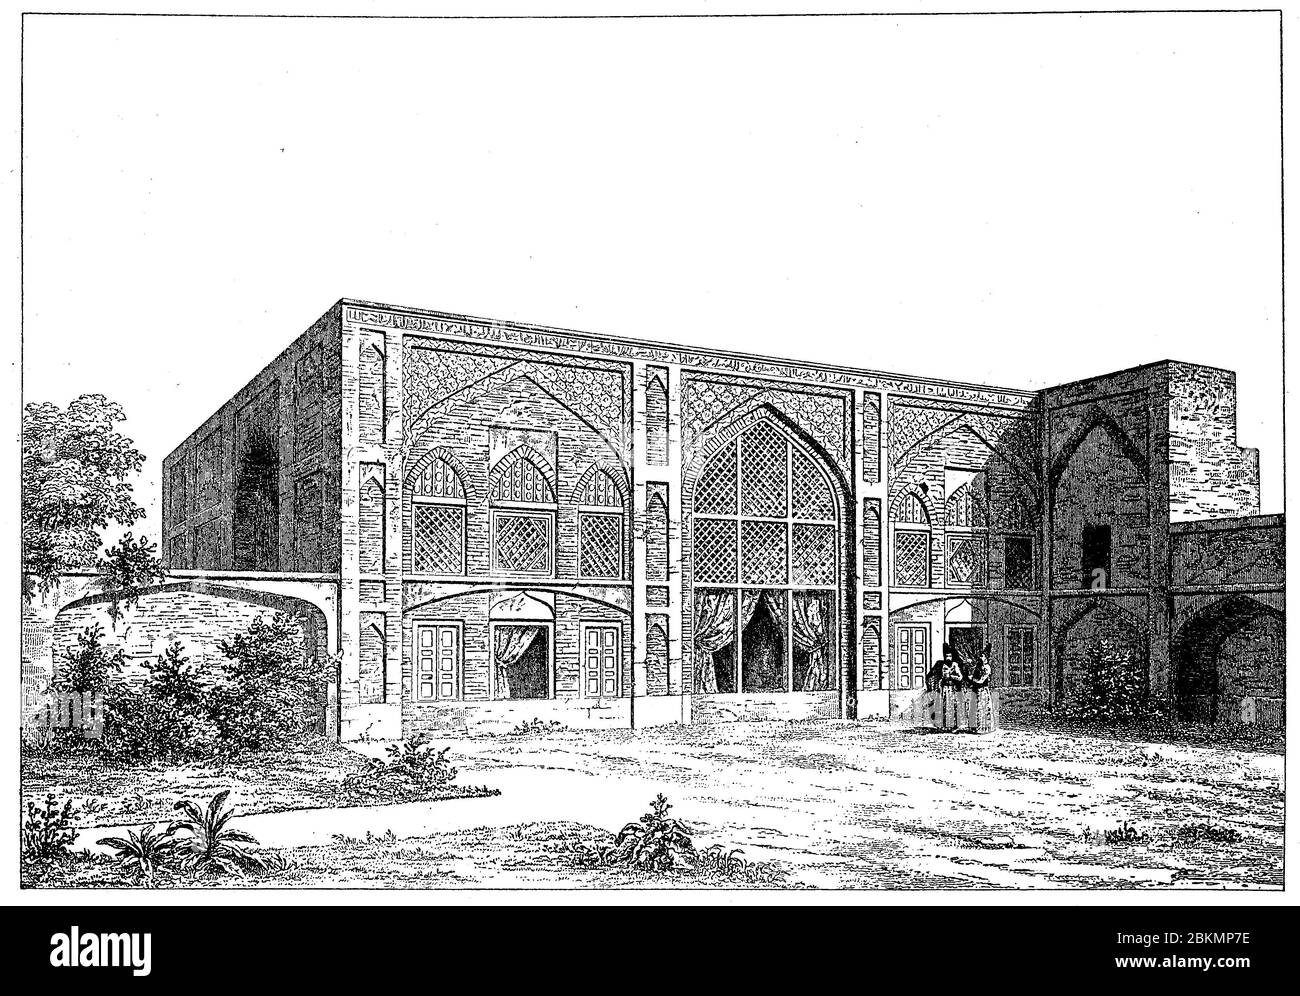 Persian House near Isfahan, Left the Harem, Persia, Iran, ca 1750 / Persisches Wohnhaus bei Isfahan, links der Harem, Persien, Iran, ca 1750, Historisch, historisch, digital verbesserte Reproduktion eines Originals aus dem 19. Jahrhundert / Digitale Reproduktion einer Originalvorlage aus dem 19. Jahrhundert, Stockfoto